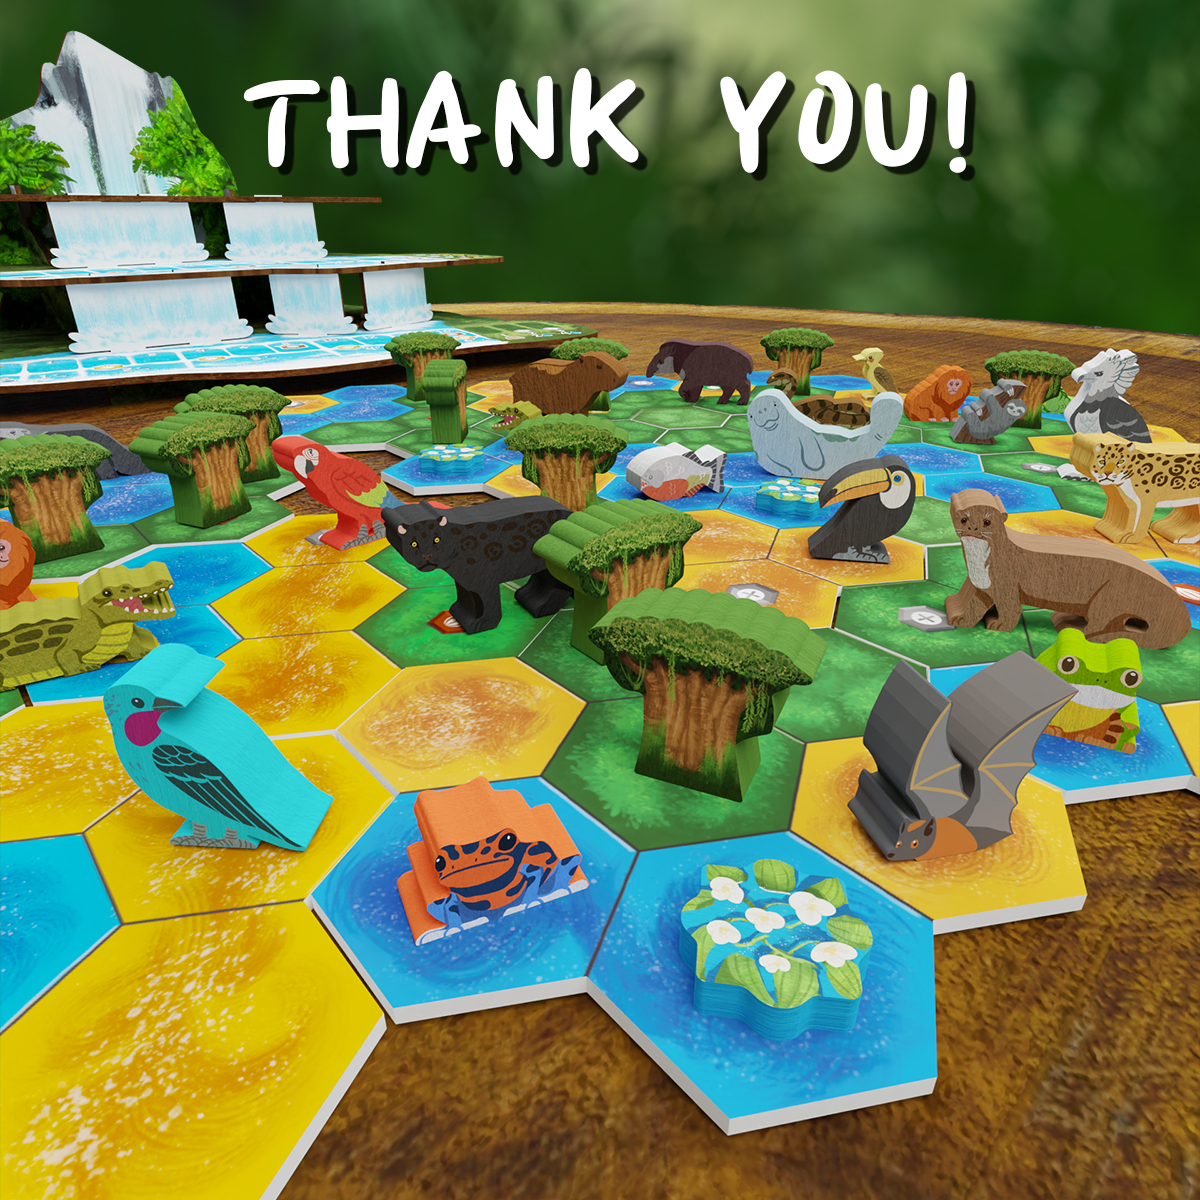 AND THAT'S A WRAP. This marks the end of yet another amazing adventure with 'Life of the Serengeti'! 19 Stretch Goals unlocked and 26 animals to fill our Jungles. Thanks again to everyone who has supported, encouraged, and helped us develop our visions! Thank you.